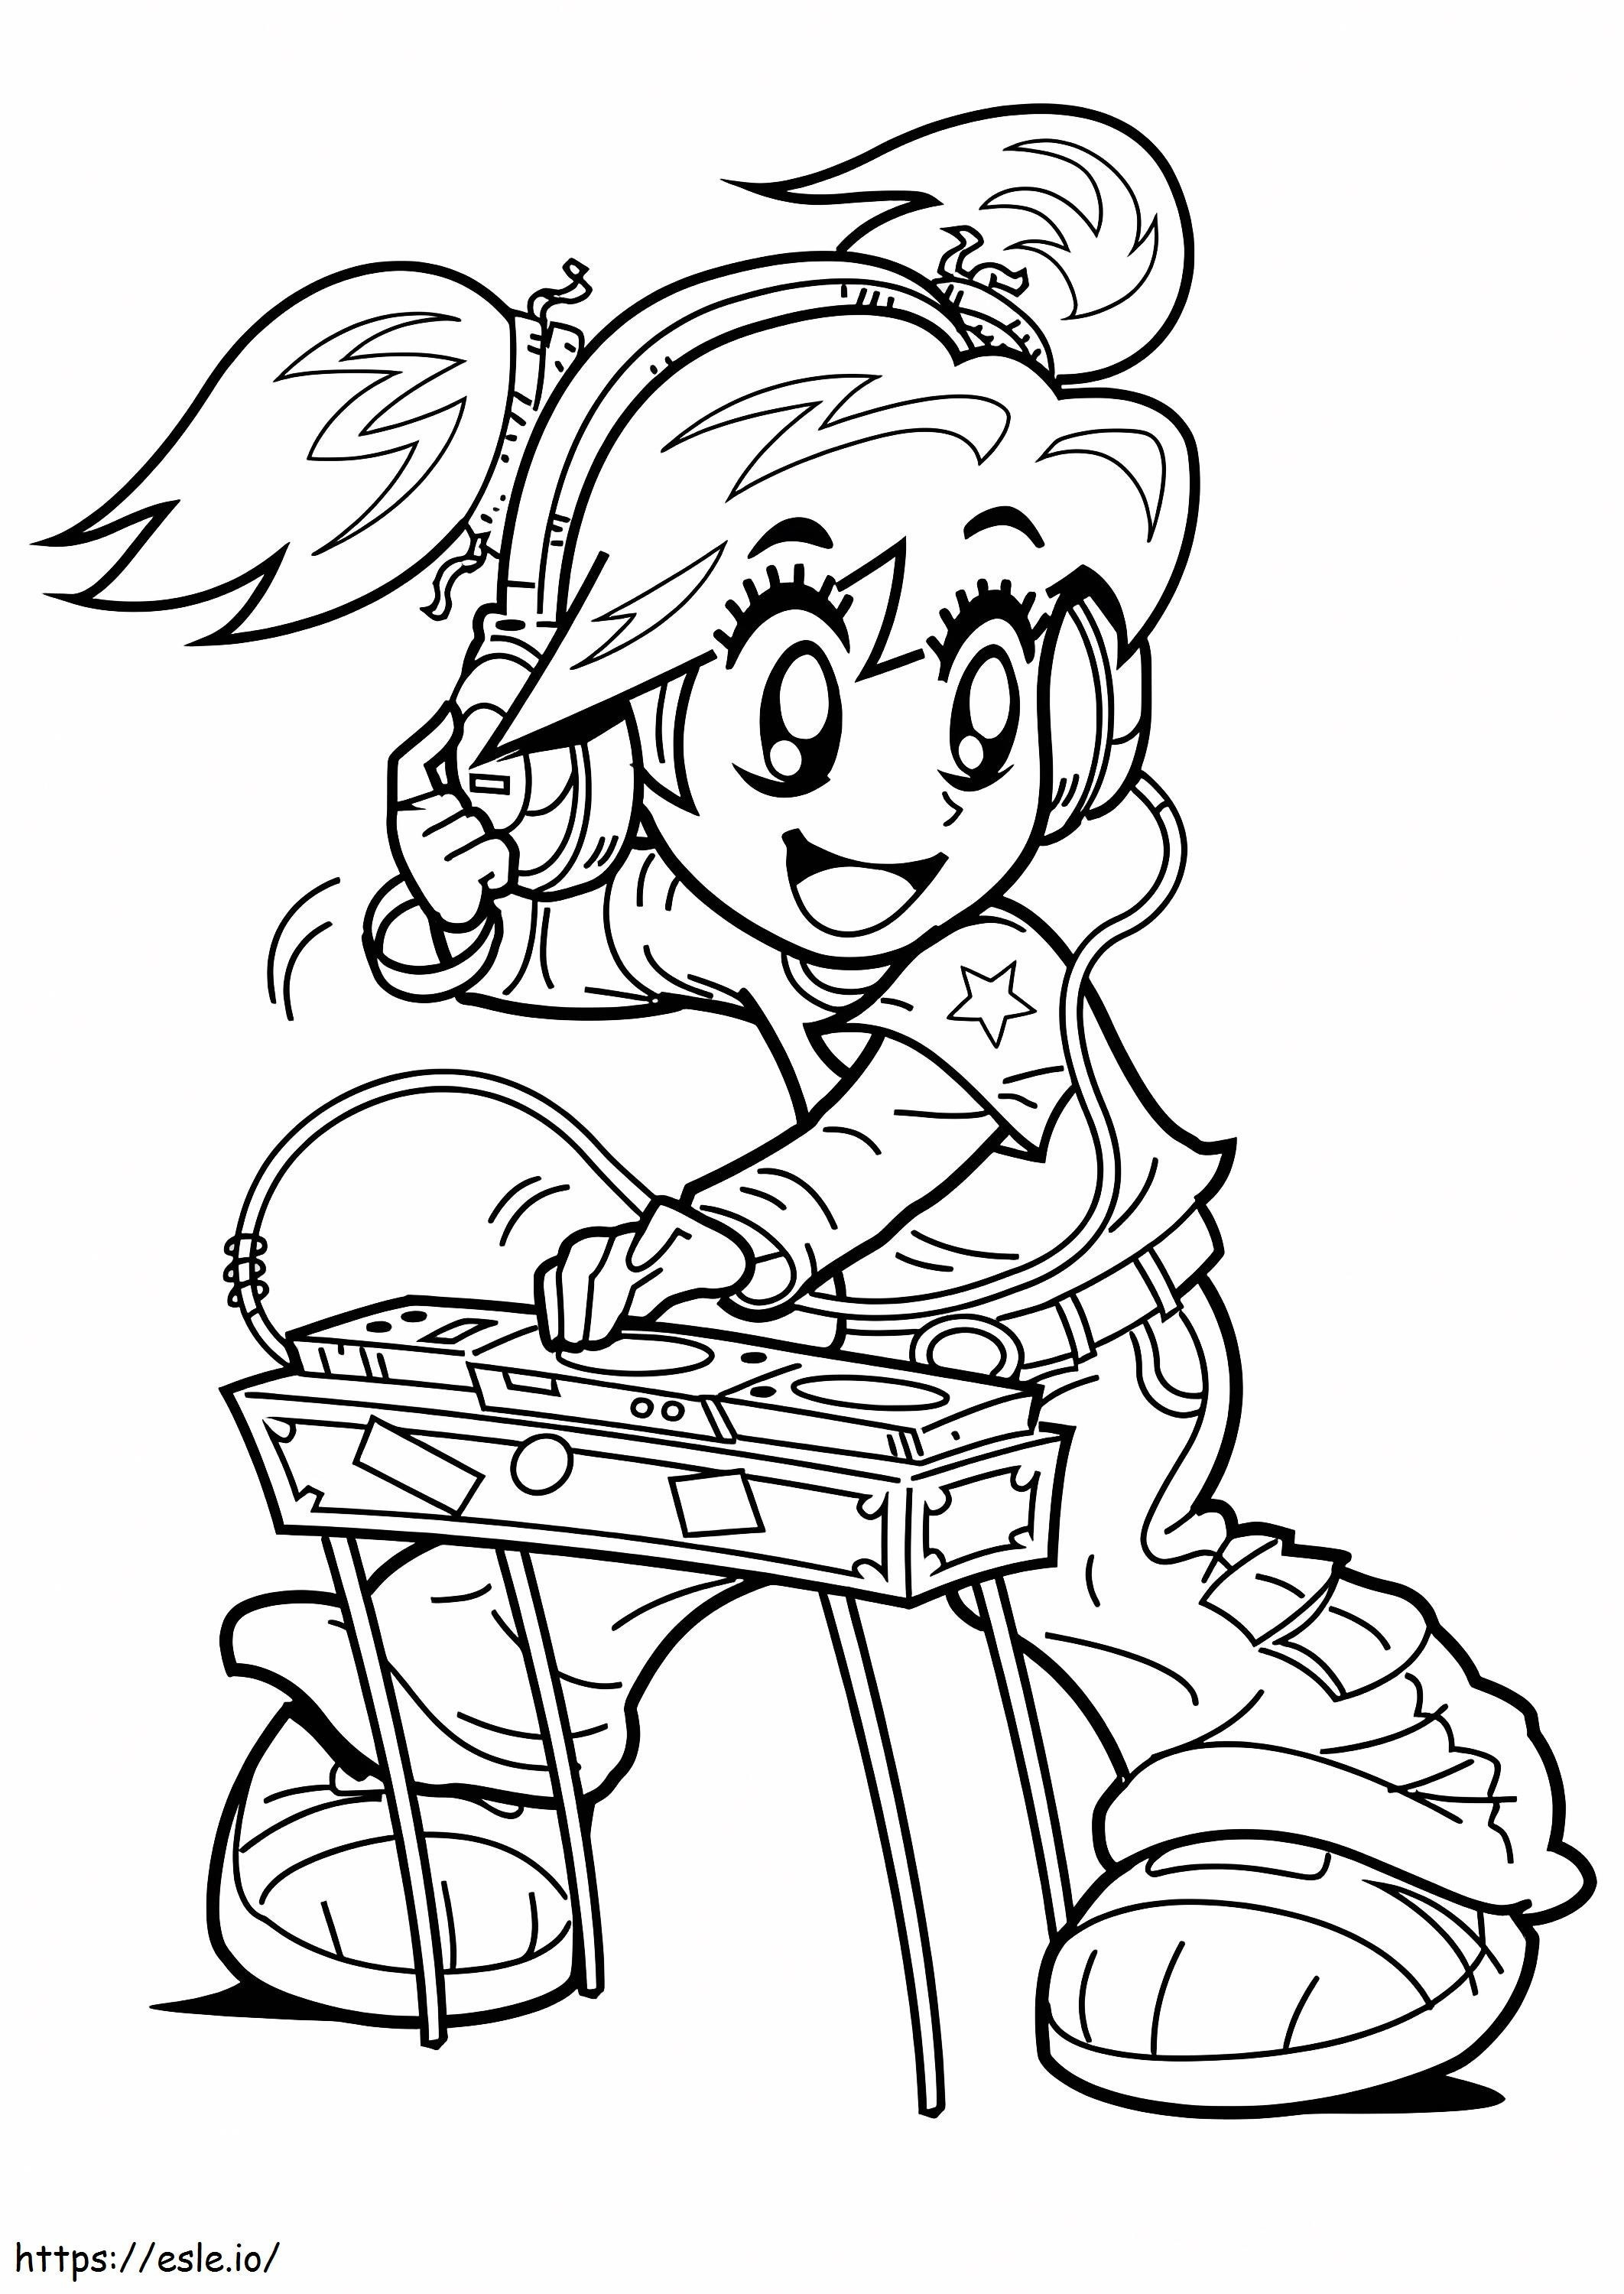 Cute Dj coloring page